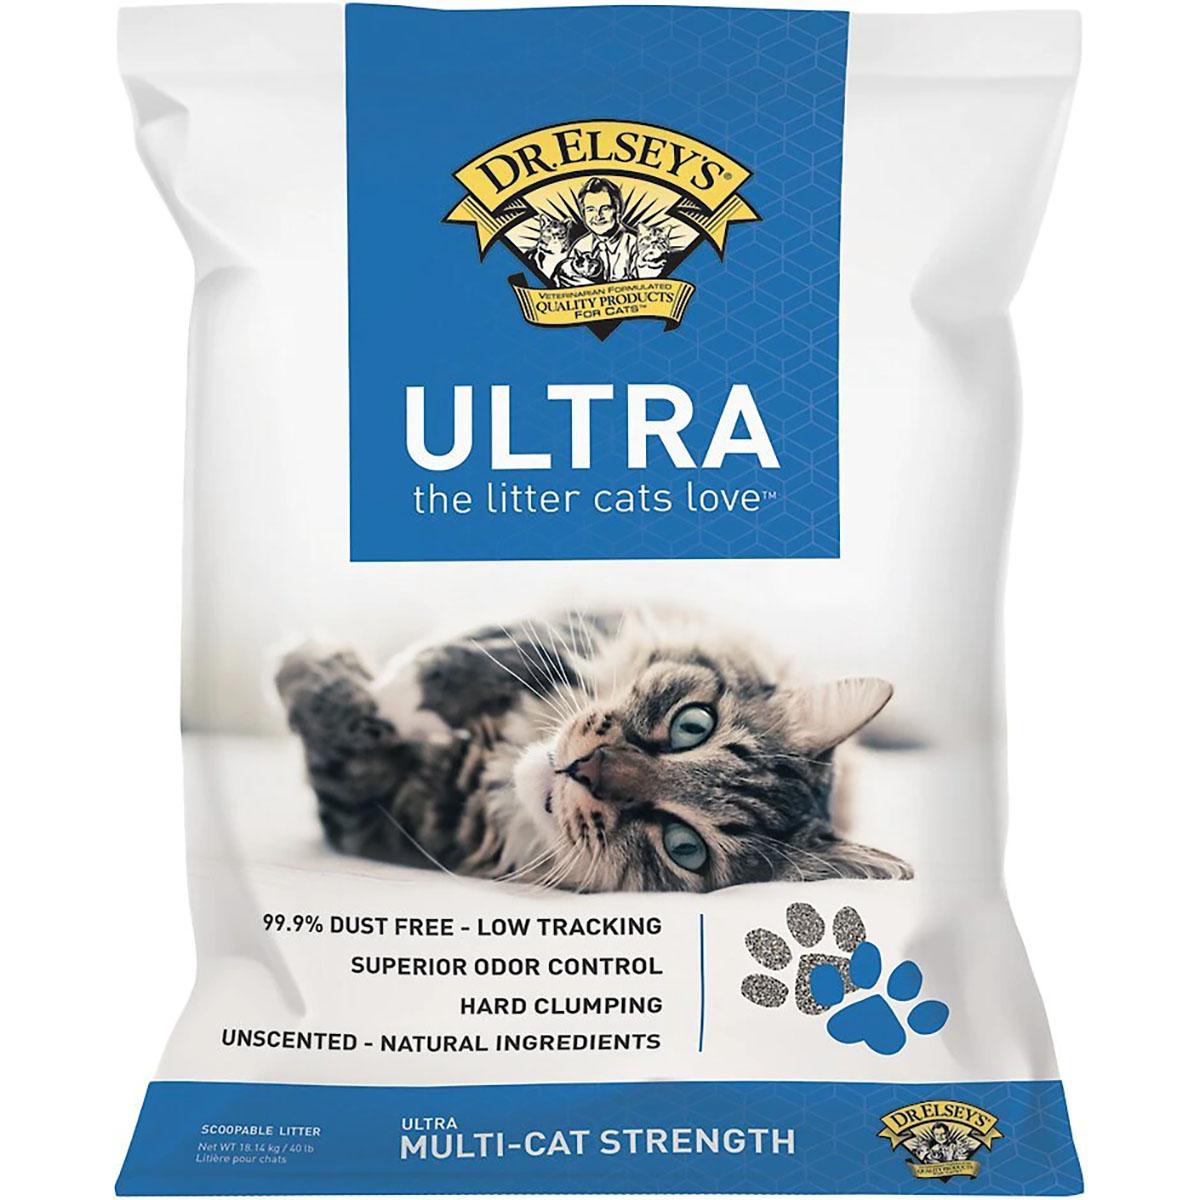 Dr. Elsey's Ultra Unscented Clumping Clay Cat Litter